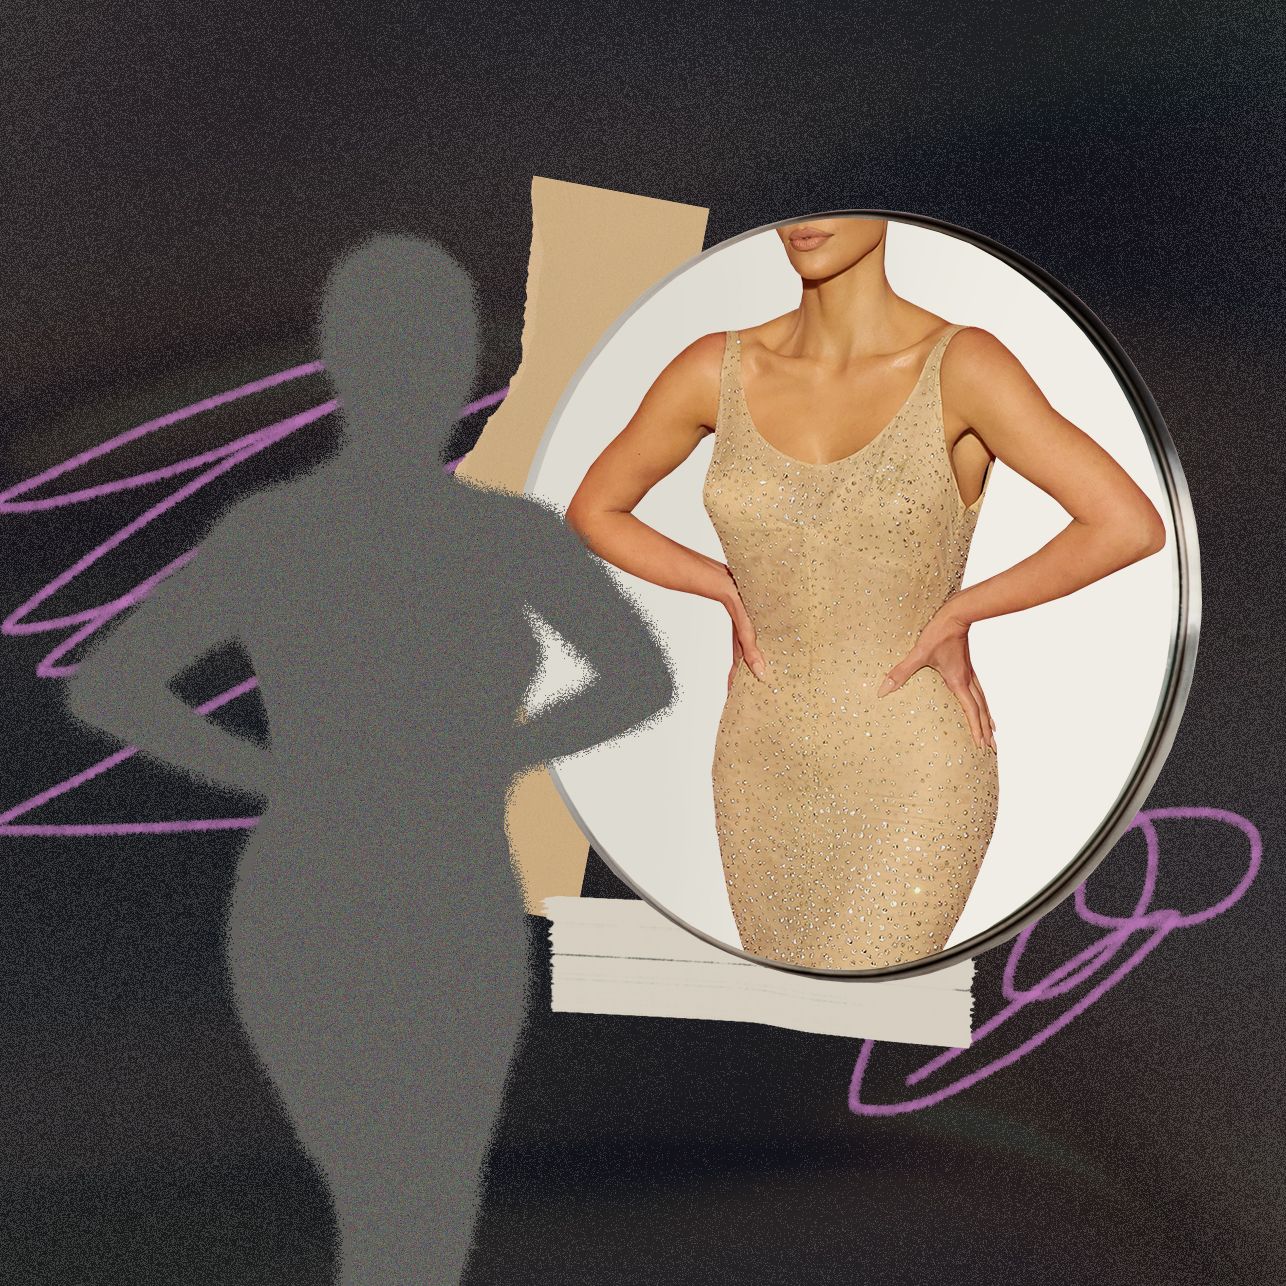 No dress, even one famously worn by Marilyn Monroe, warrants drastic weight loss.